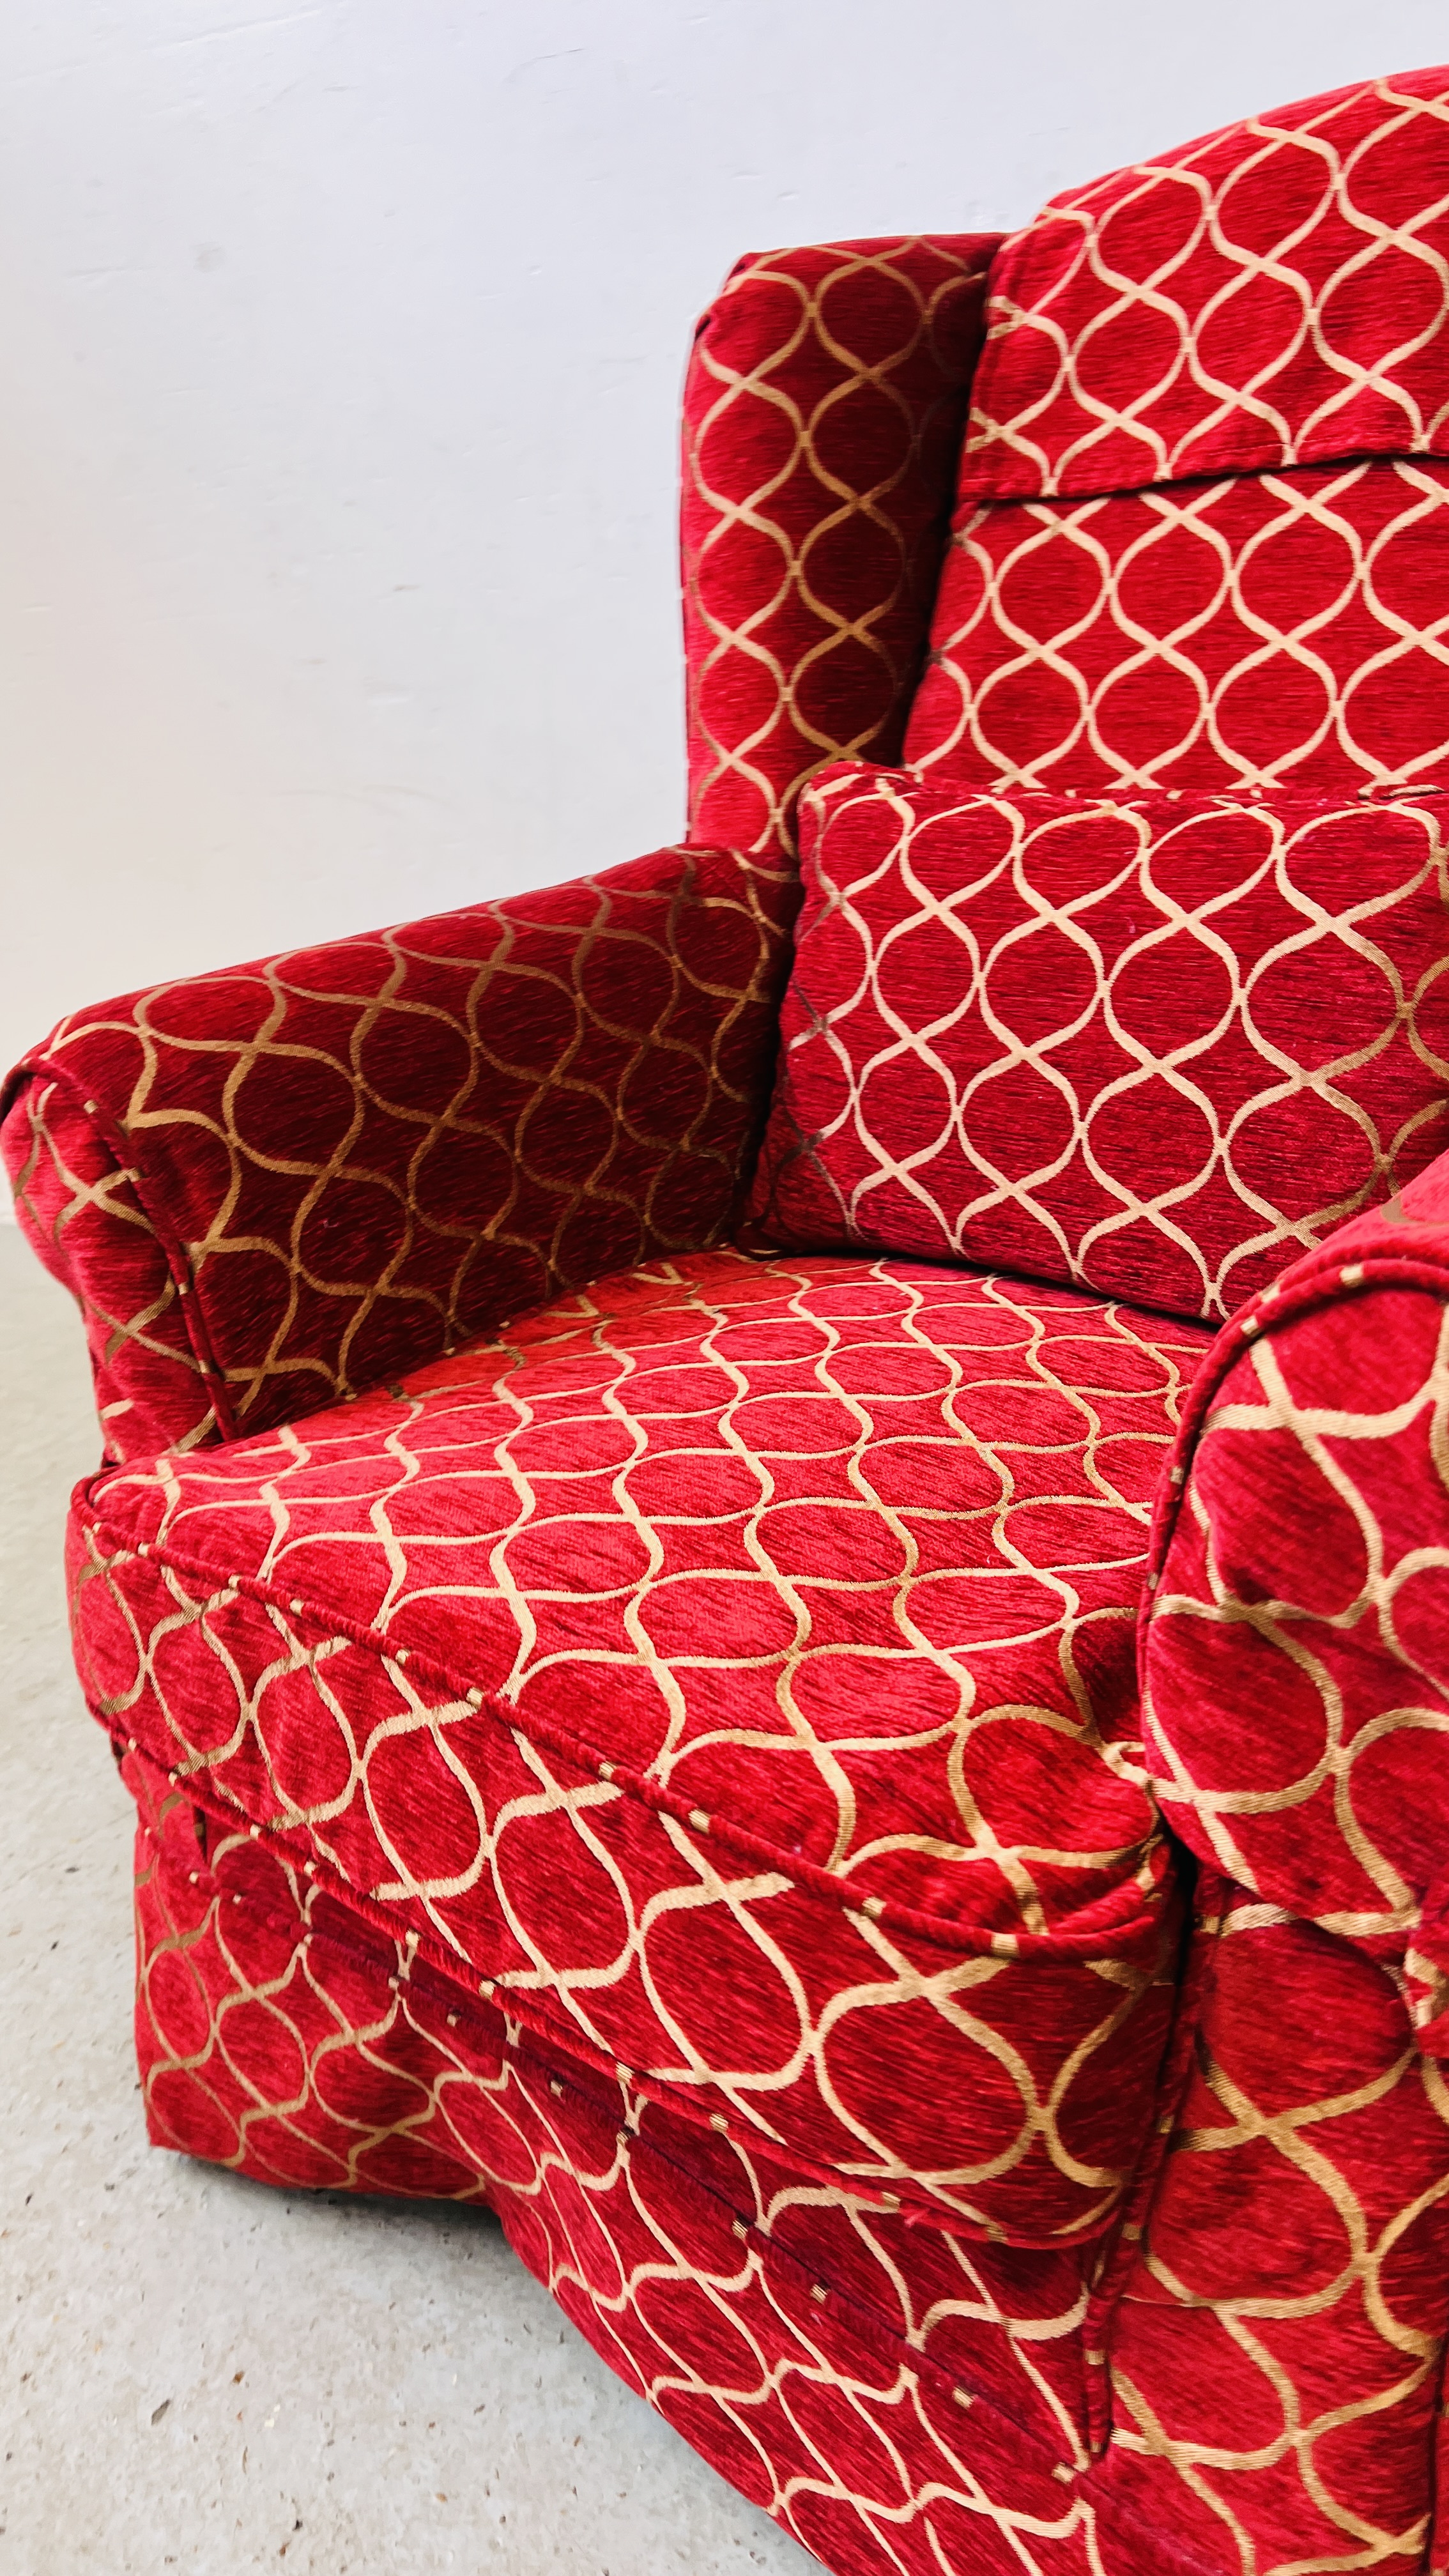 A MODERN WING BACK CHAIR UPHOLSTERED IN RED AND GOLD - Image 5 of 8